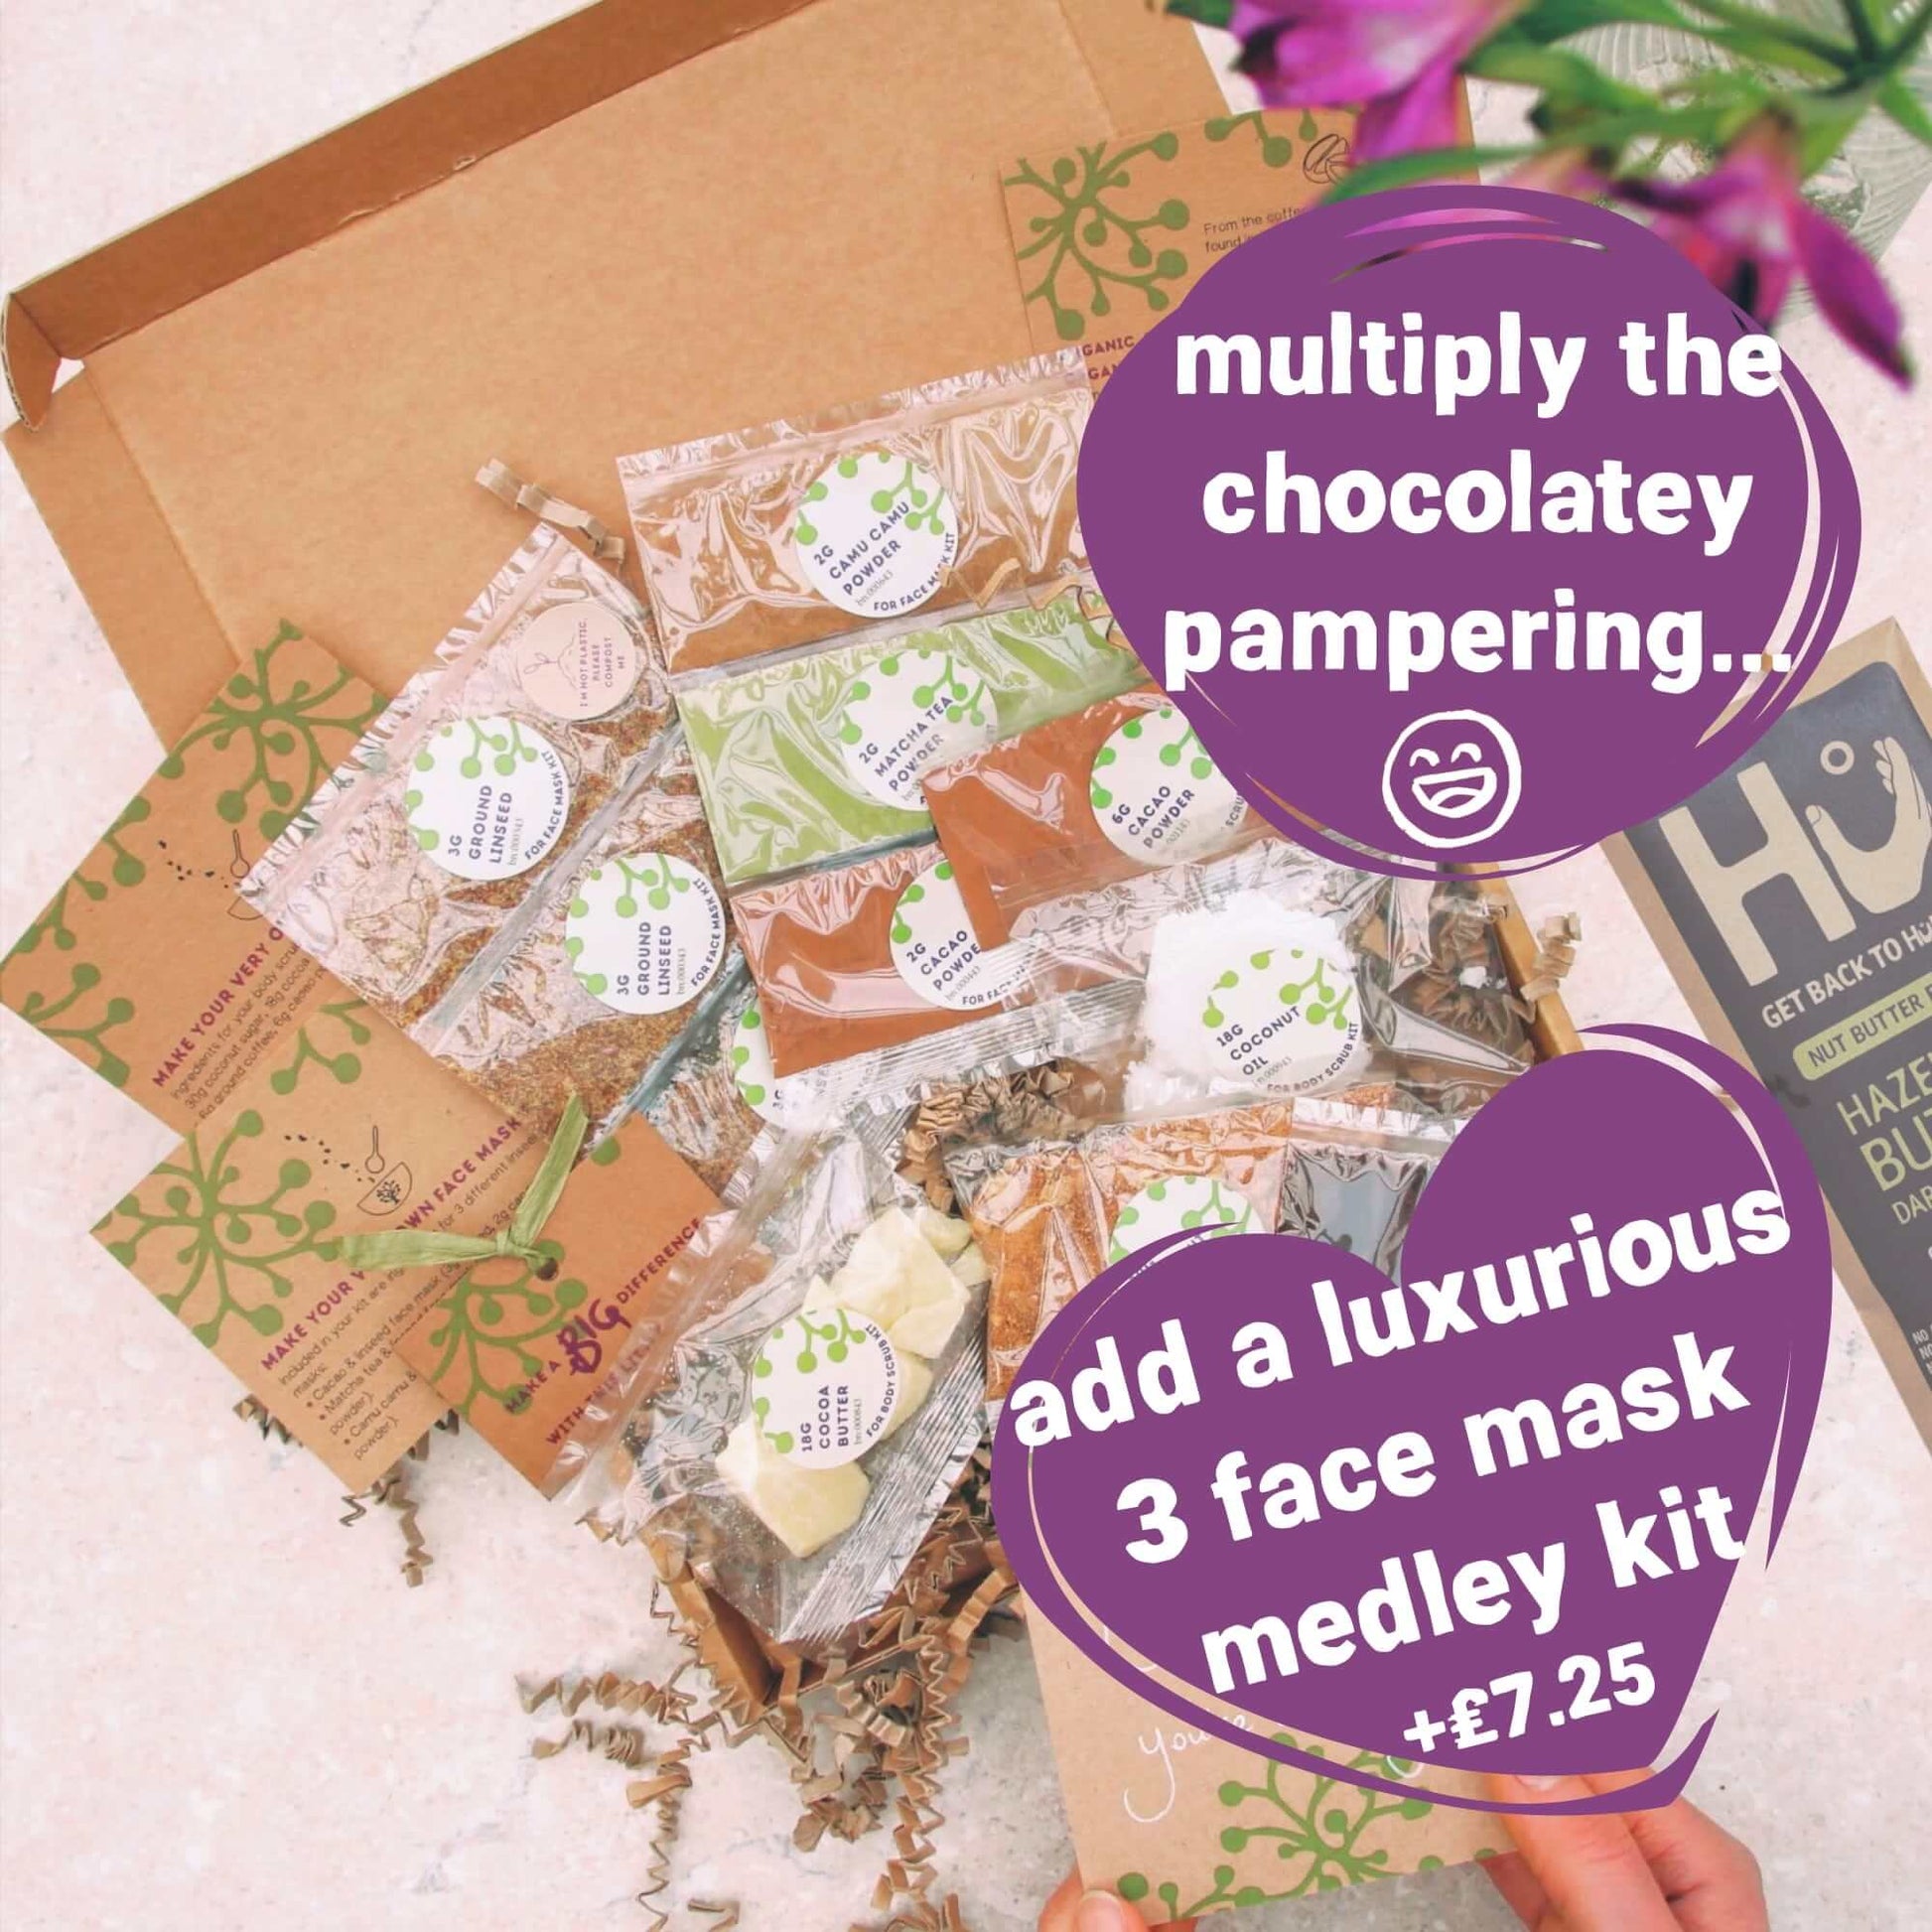 add 3 eco-friendly face mask kits to thinking of you letterbox gift